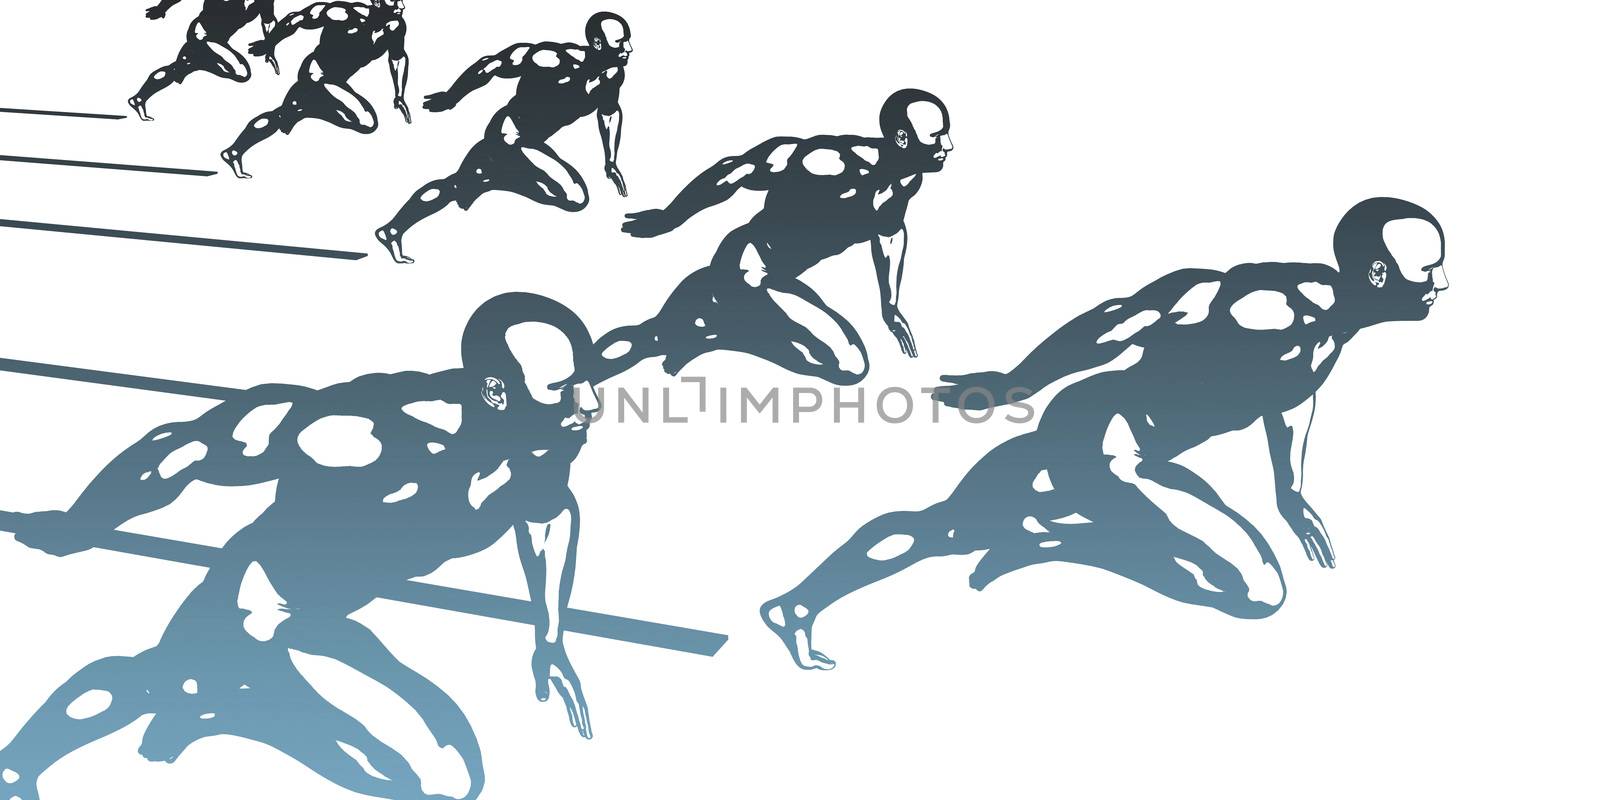 Running Silhouette Background as a Sport Concept